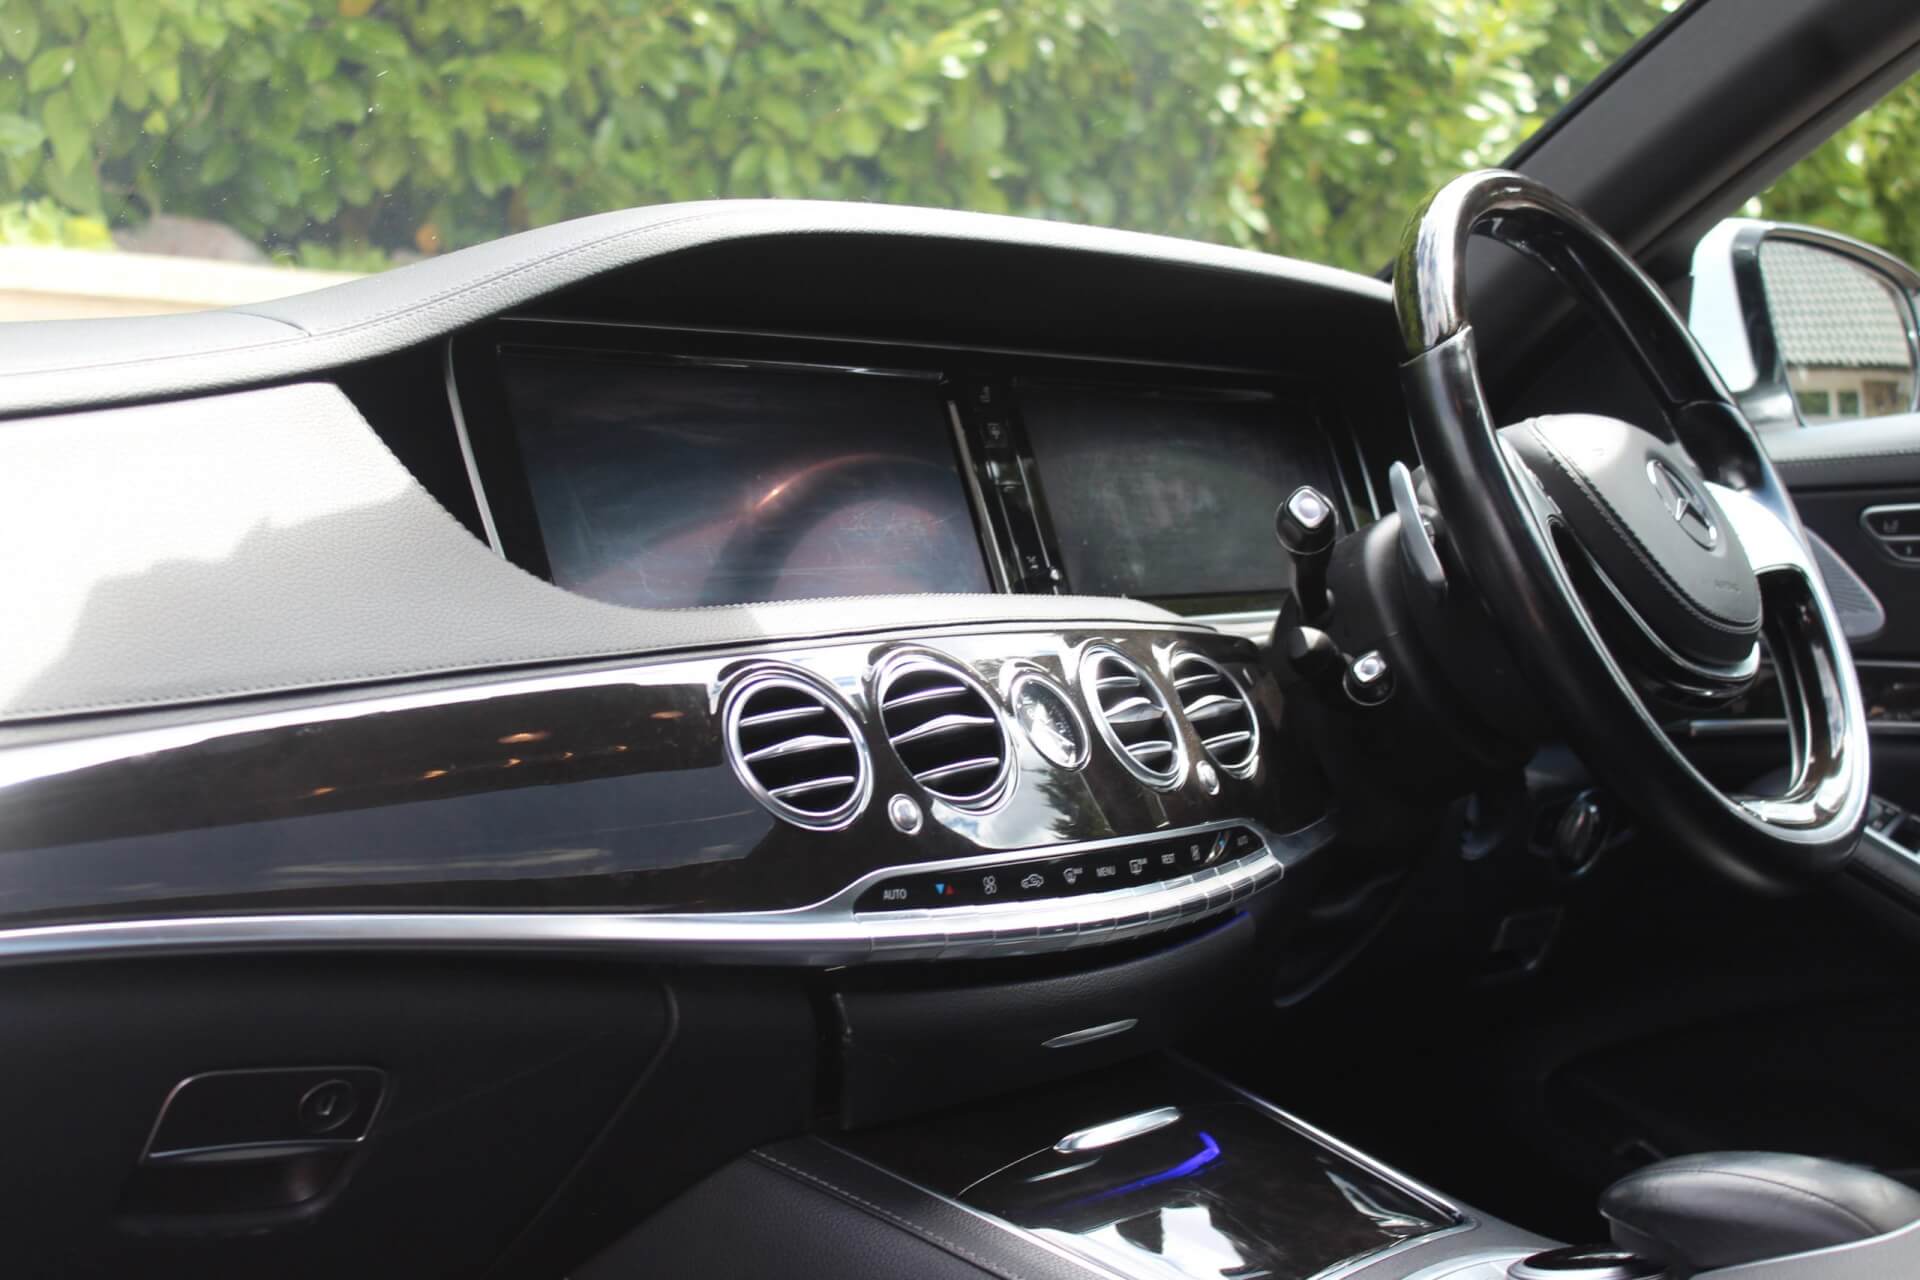 Mercedes S class with a driver